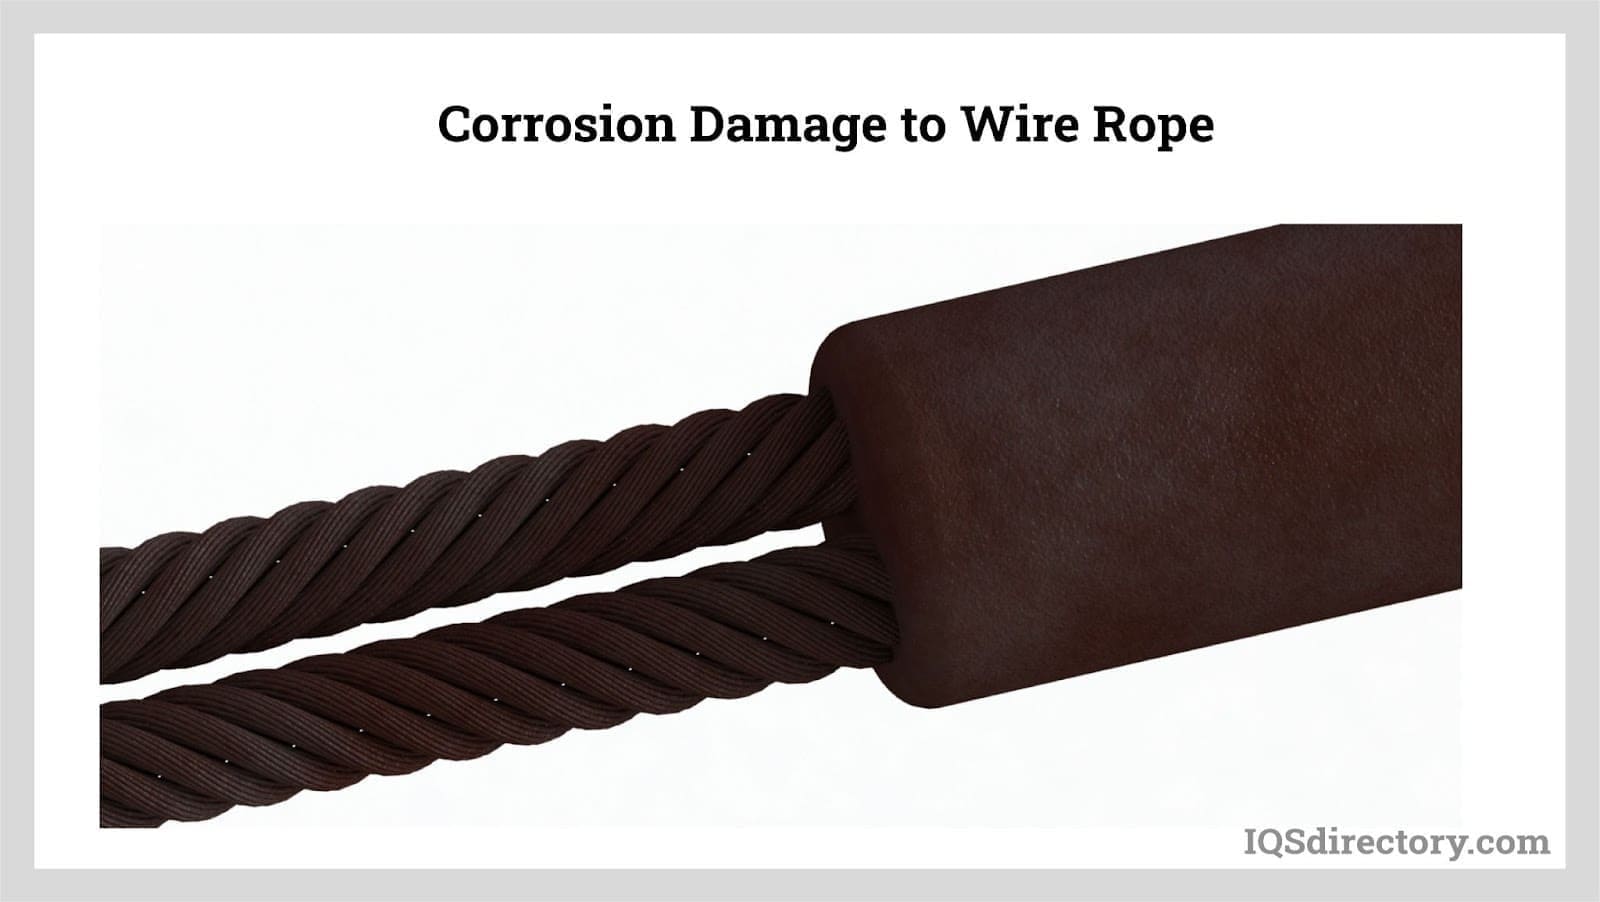 Corrosion Damage to Wire Rope